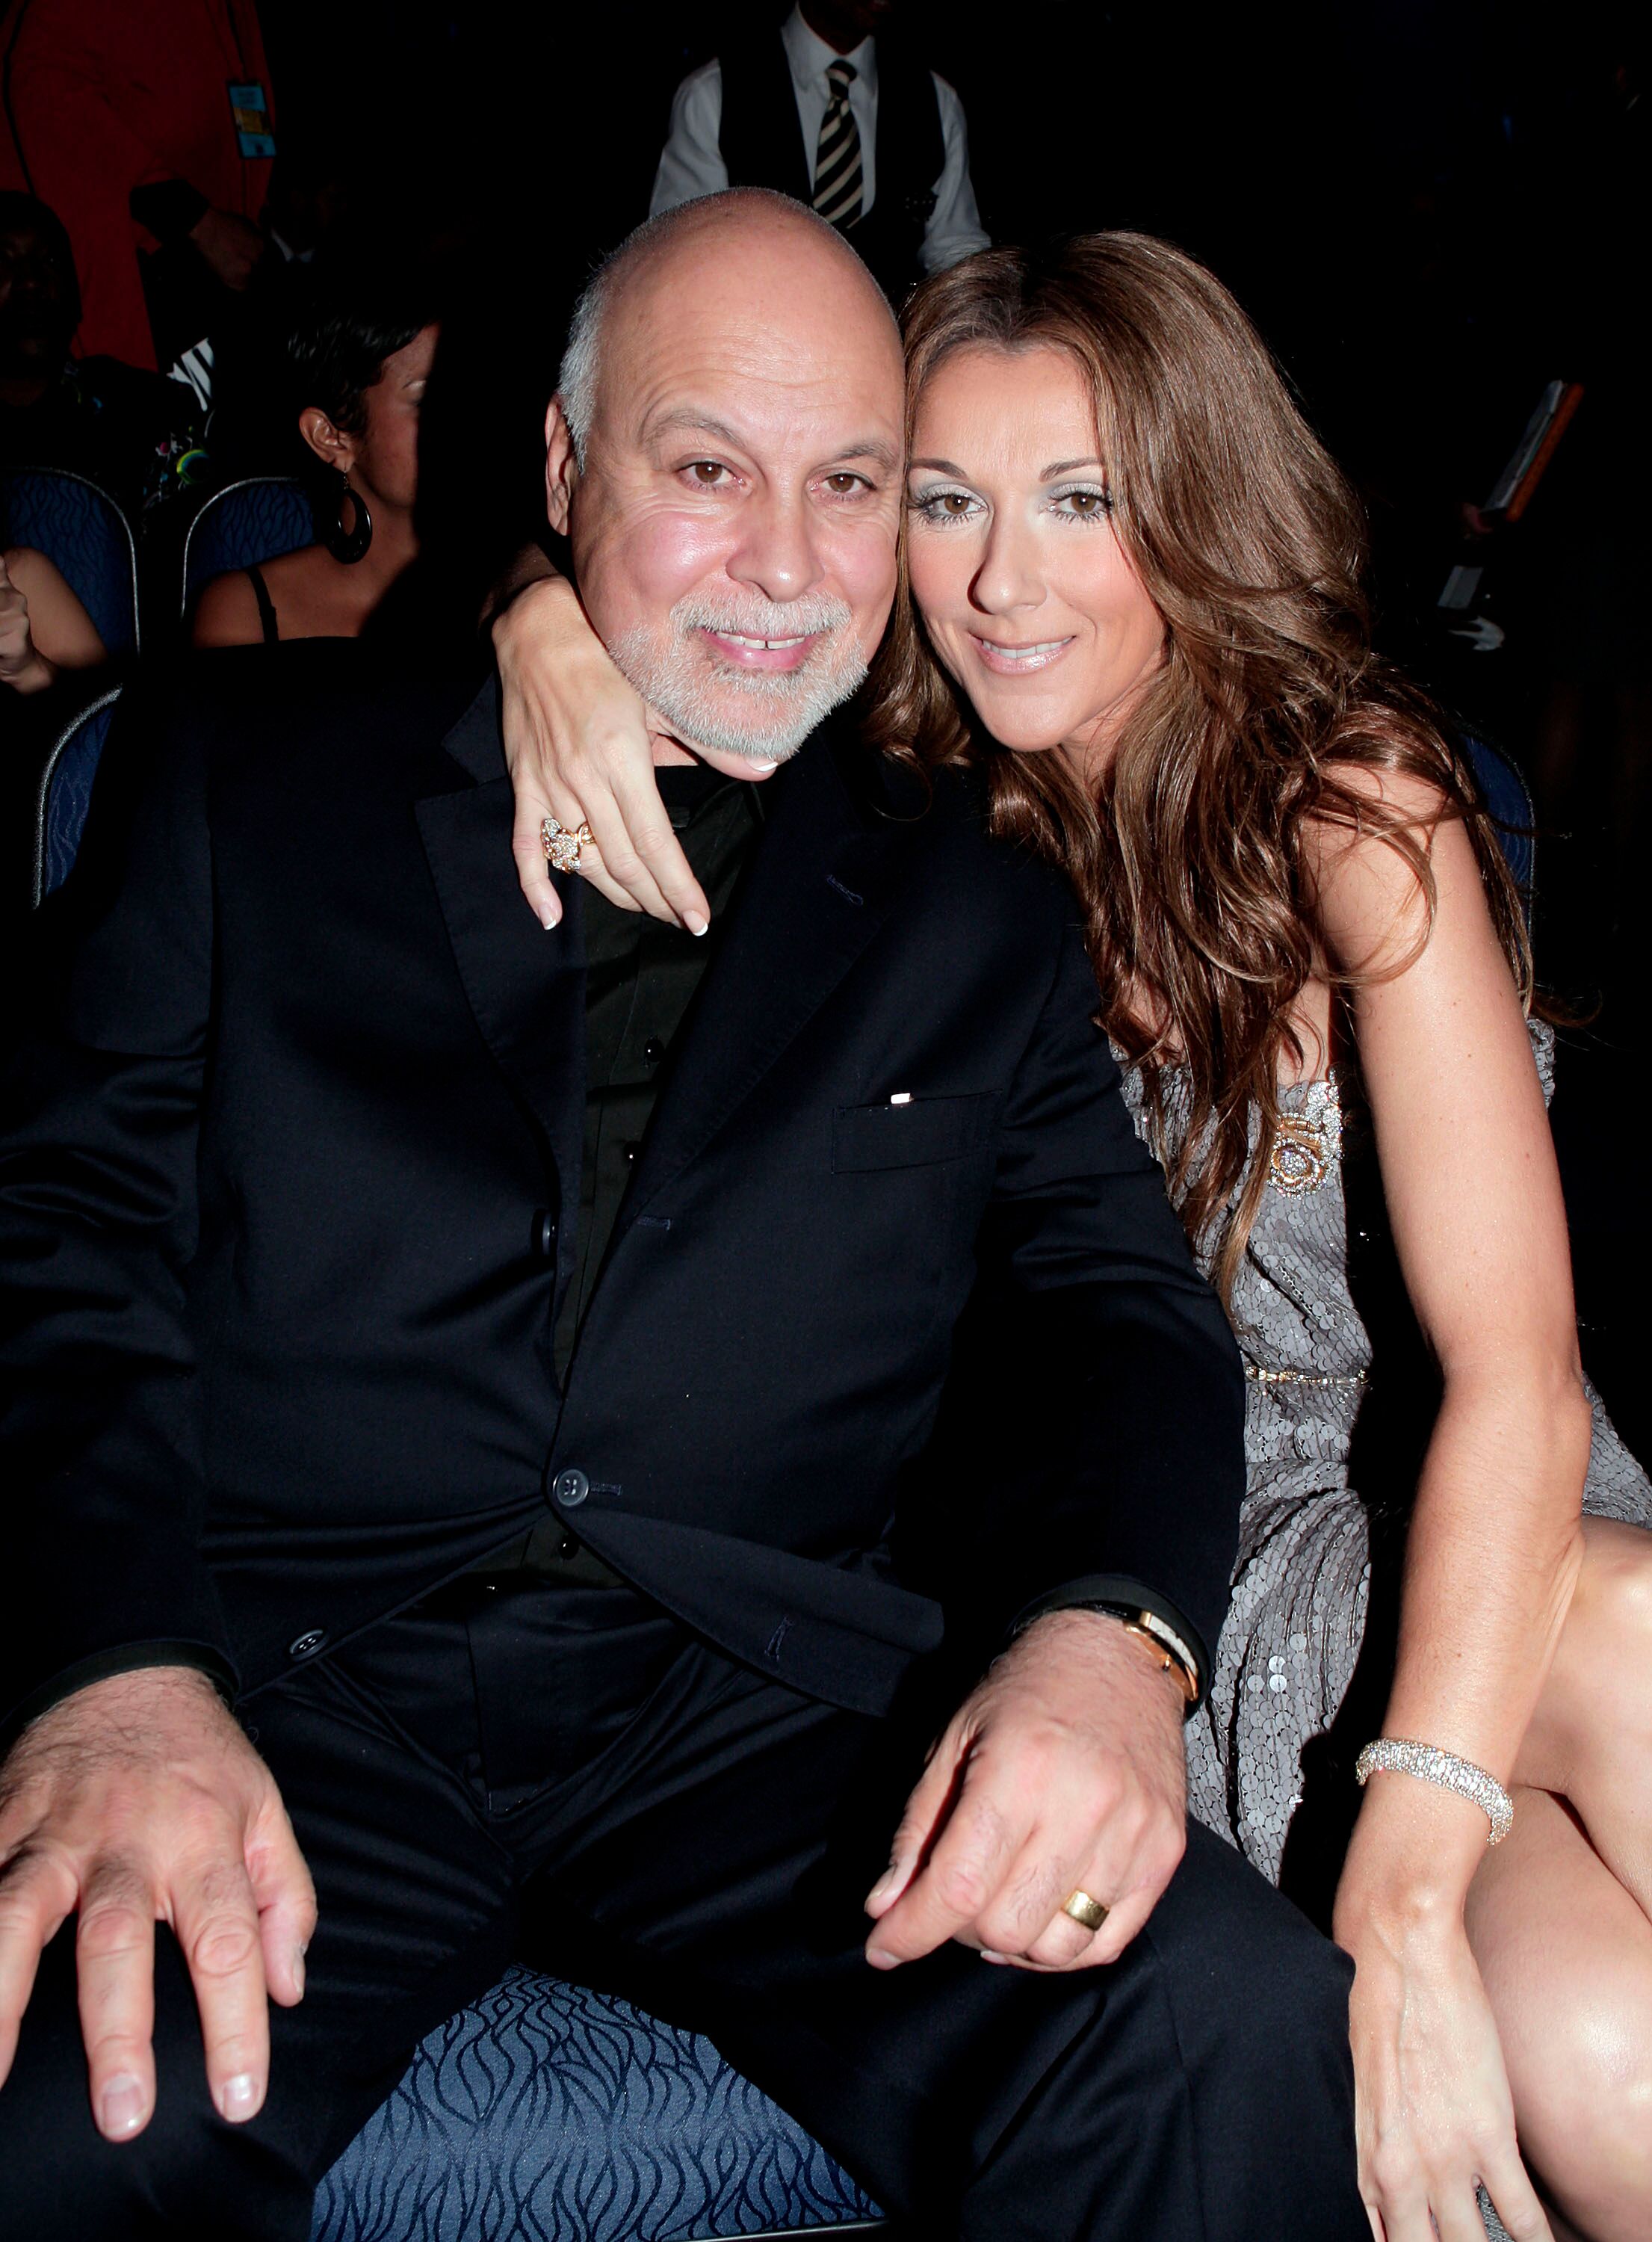 Celine Dion and husband Rene Angelil in the audience during the 2007 American Music Awards. | Source: Getty Images